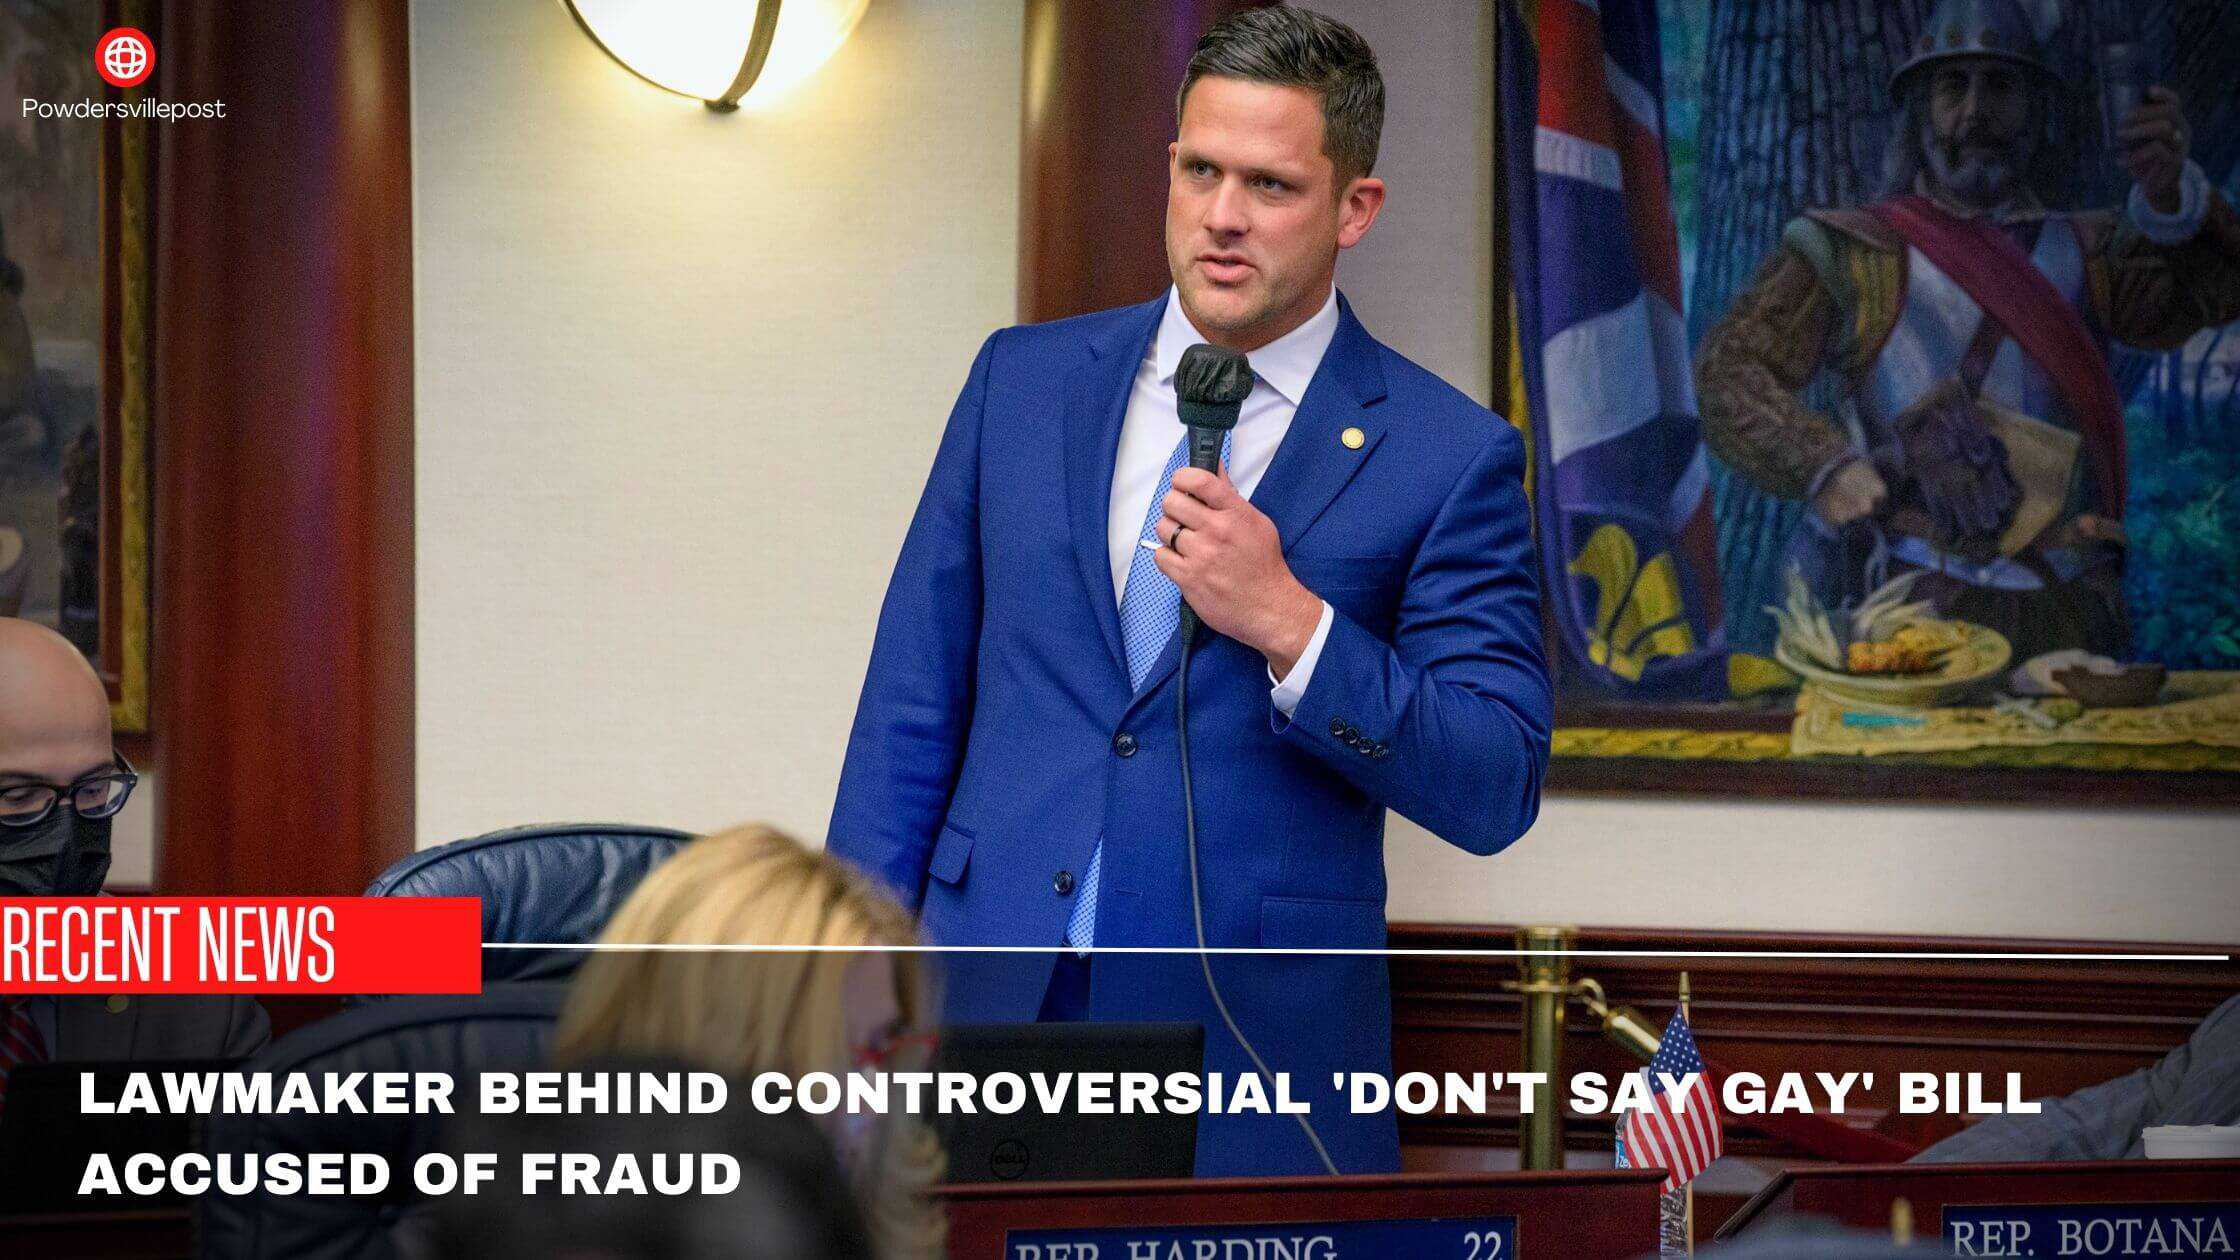 Lawmaker Behind Controversial 'Don't Say Gay Bill Accused of Fraud